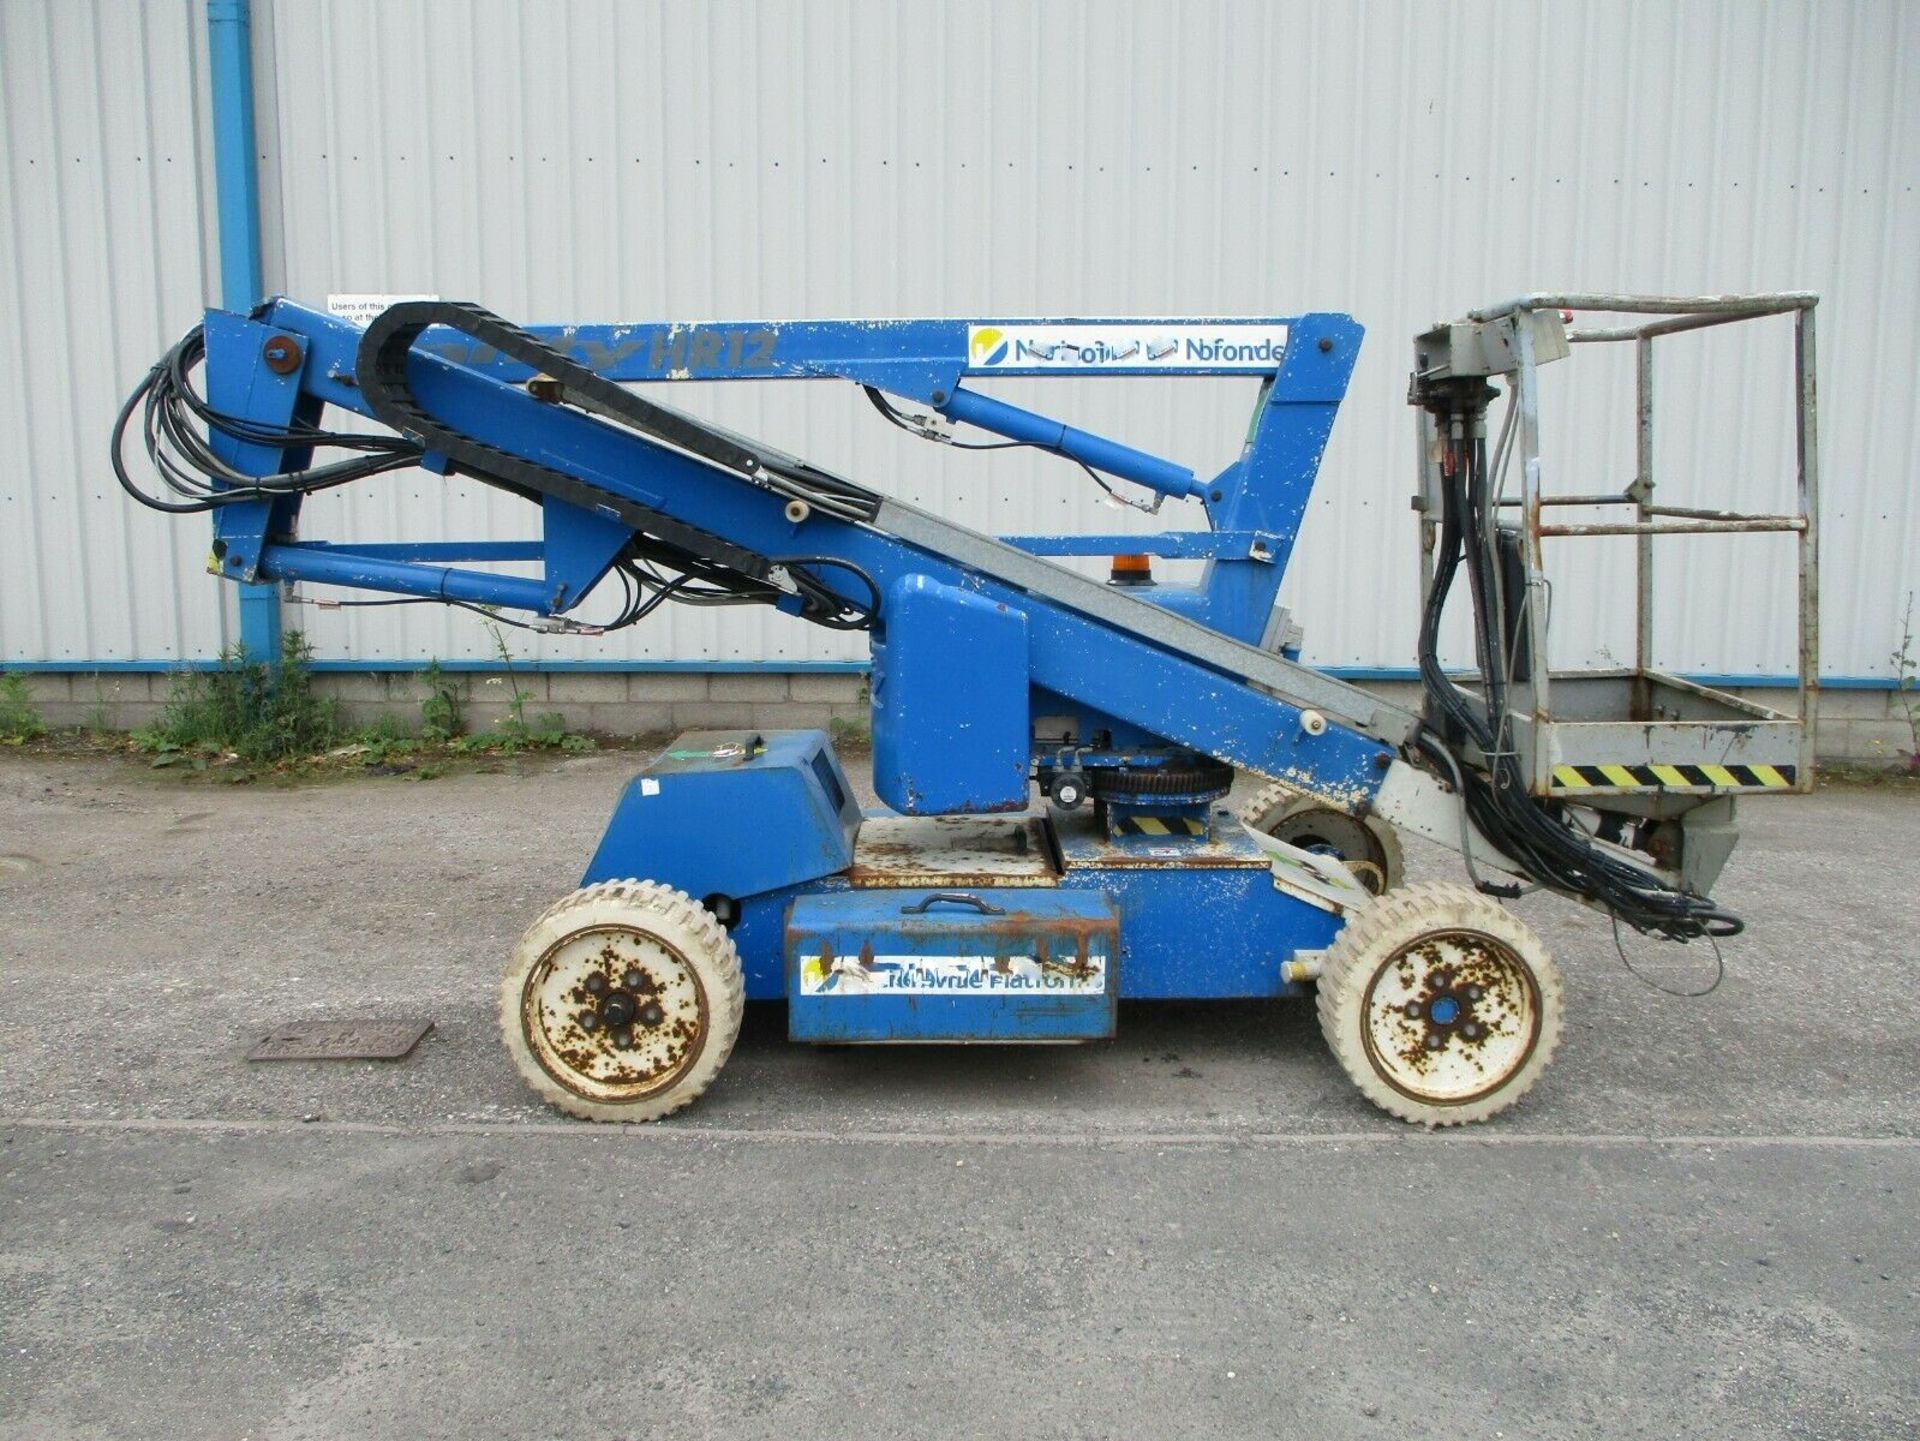 Nifty Lift HR12 Self Propelled Access Platform 2008 - Image 9 of 9